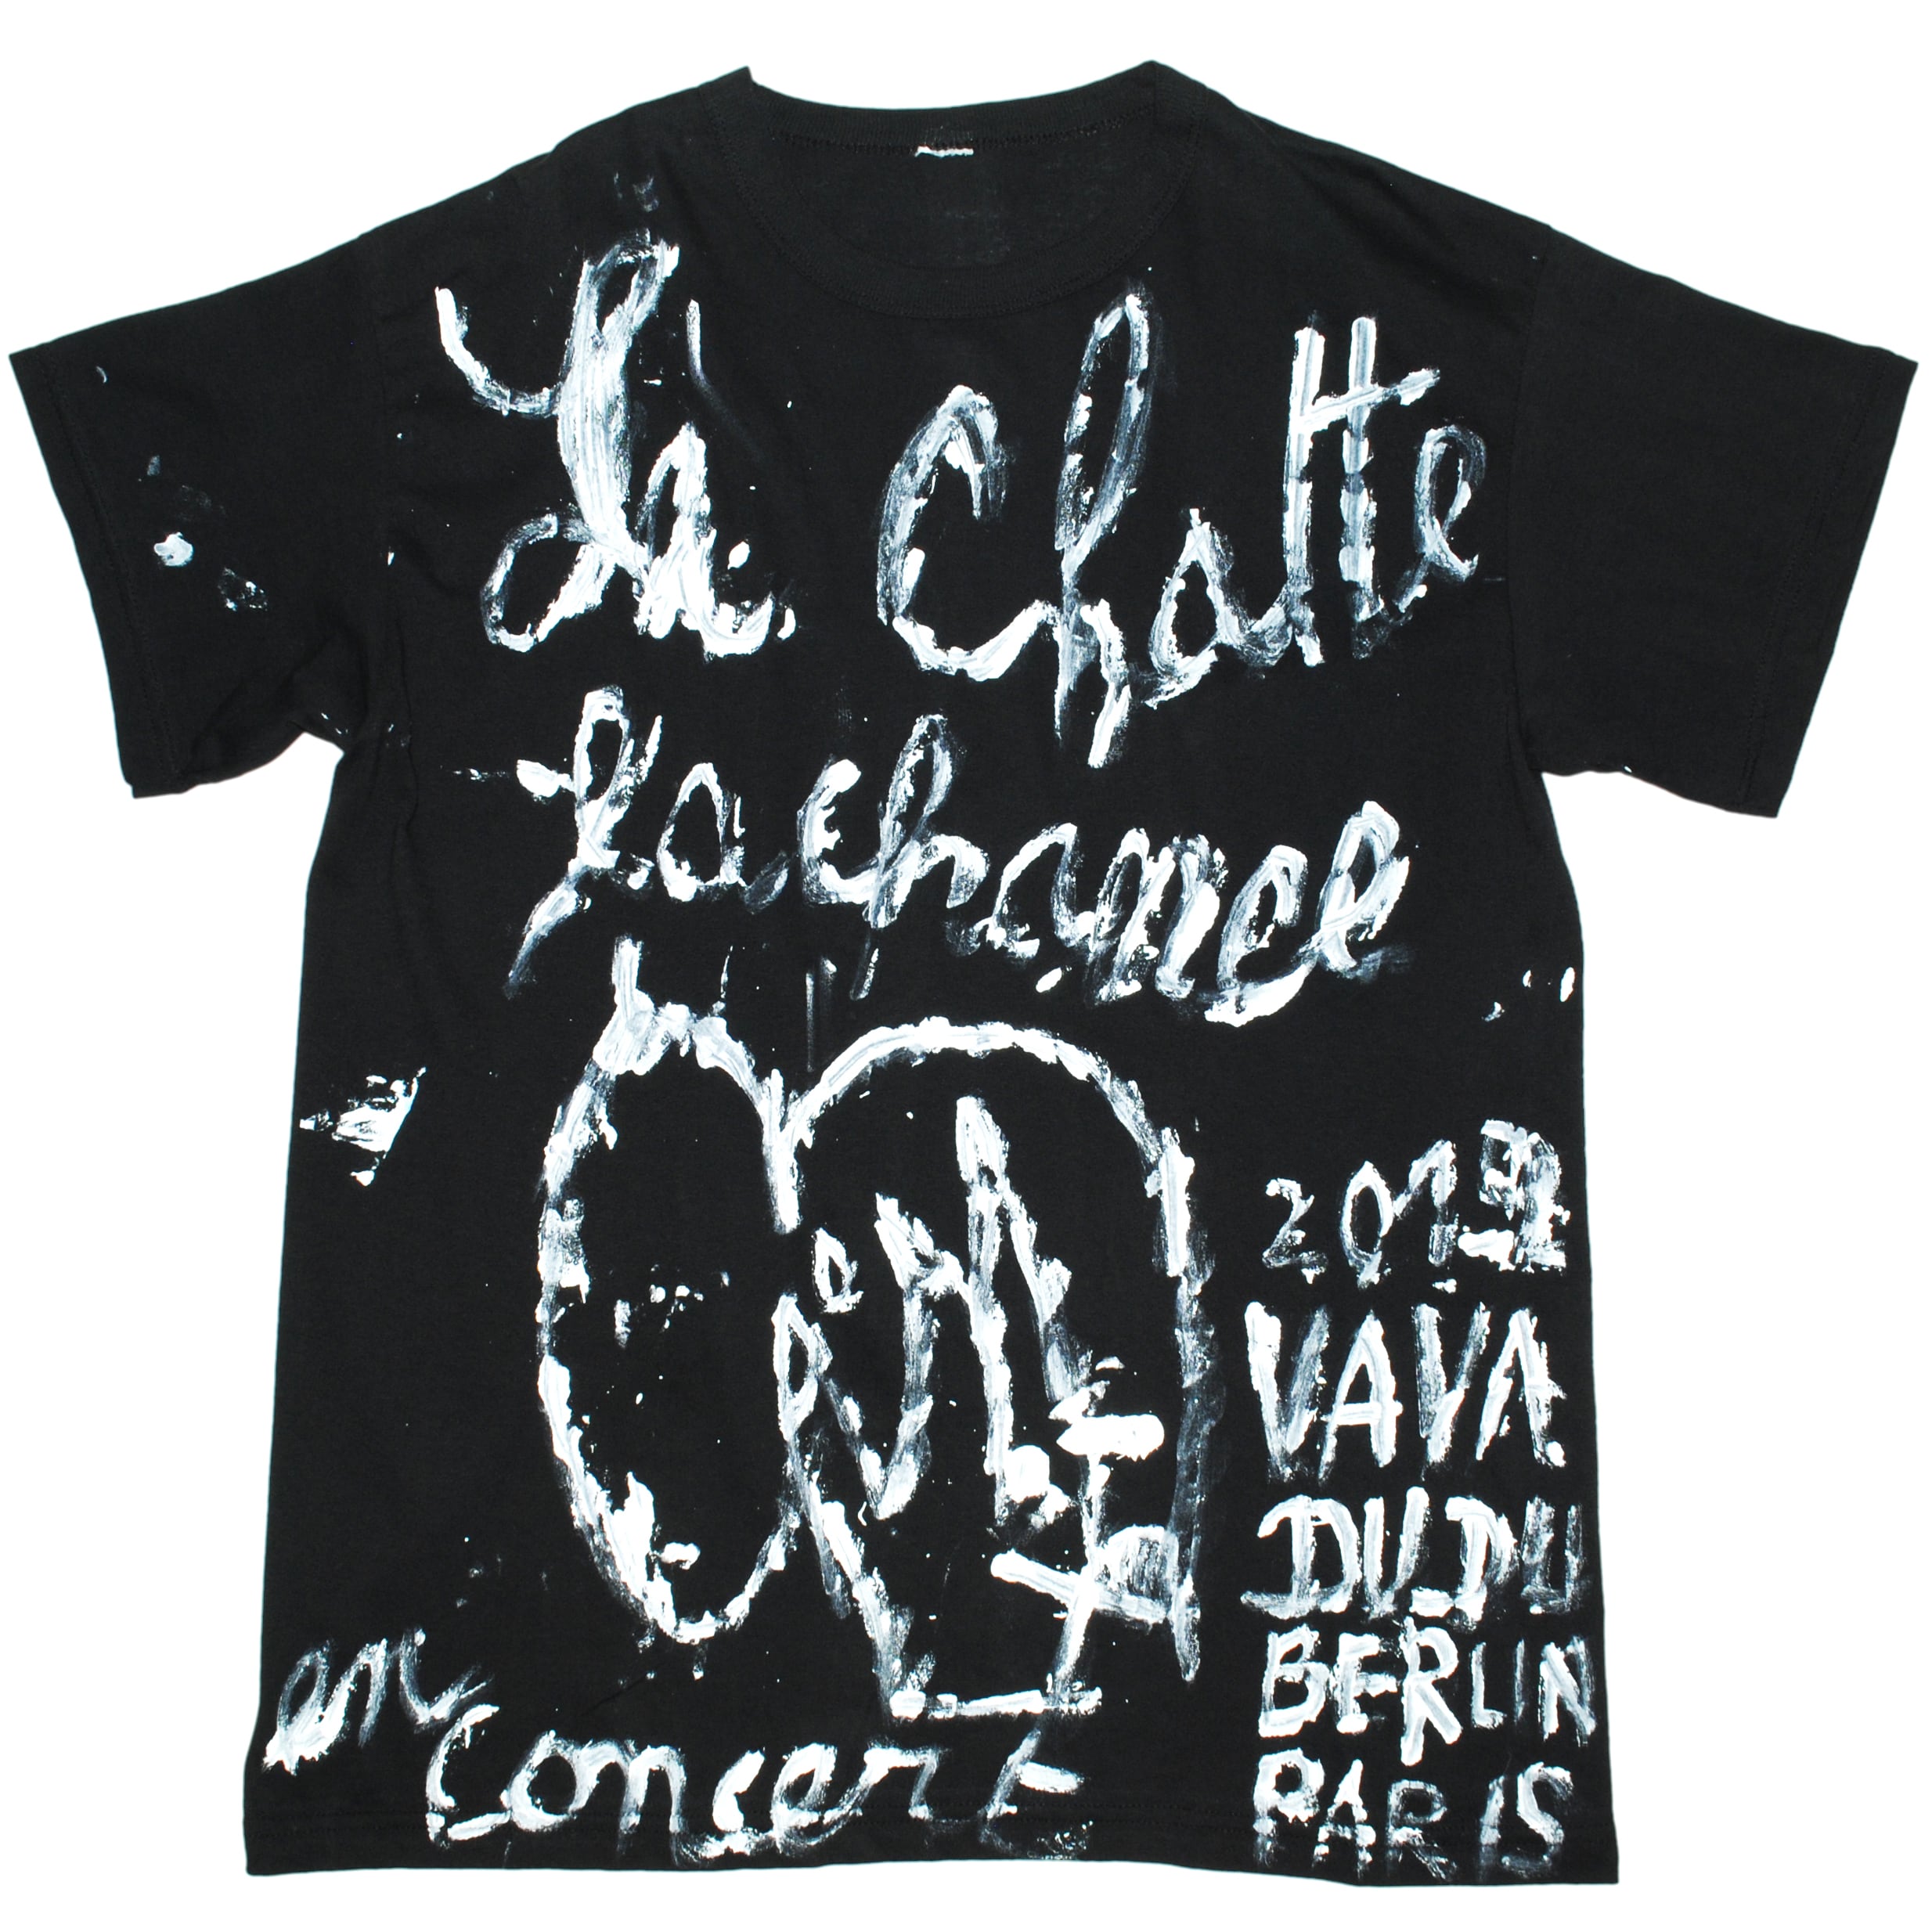 『VAVA DUDU』1off hand painted T-shirt | excube.e_shop powered by BASE